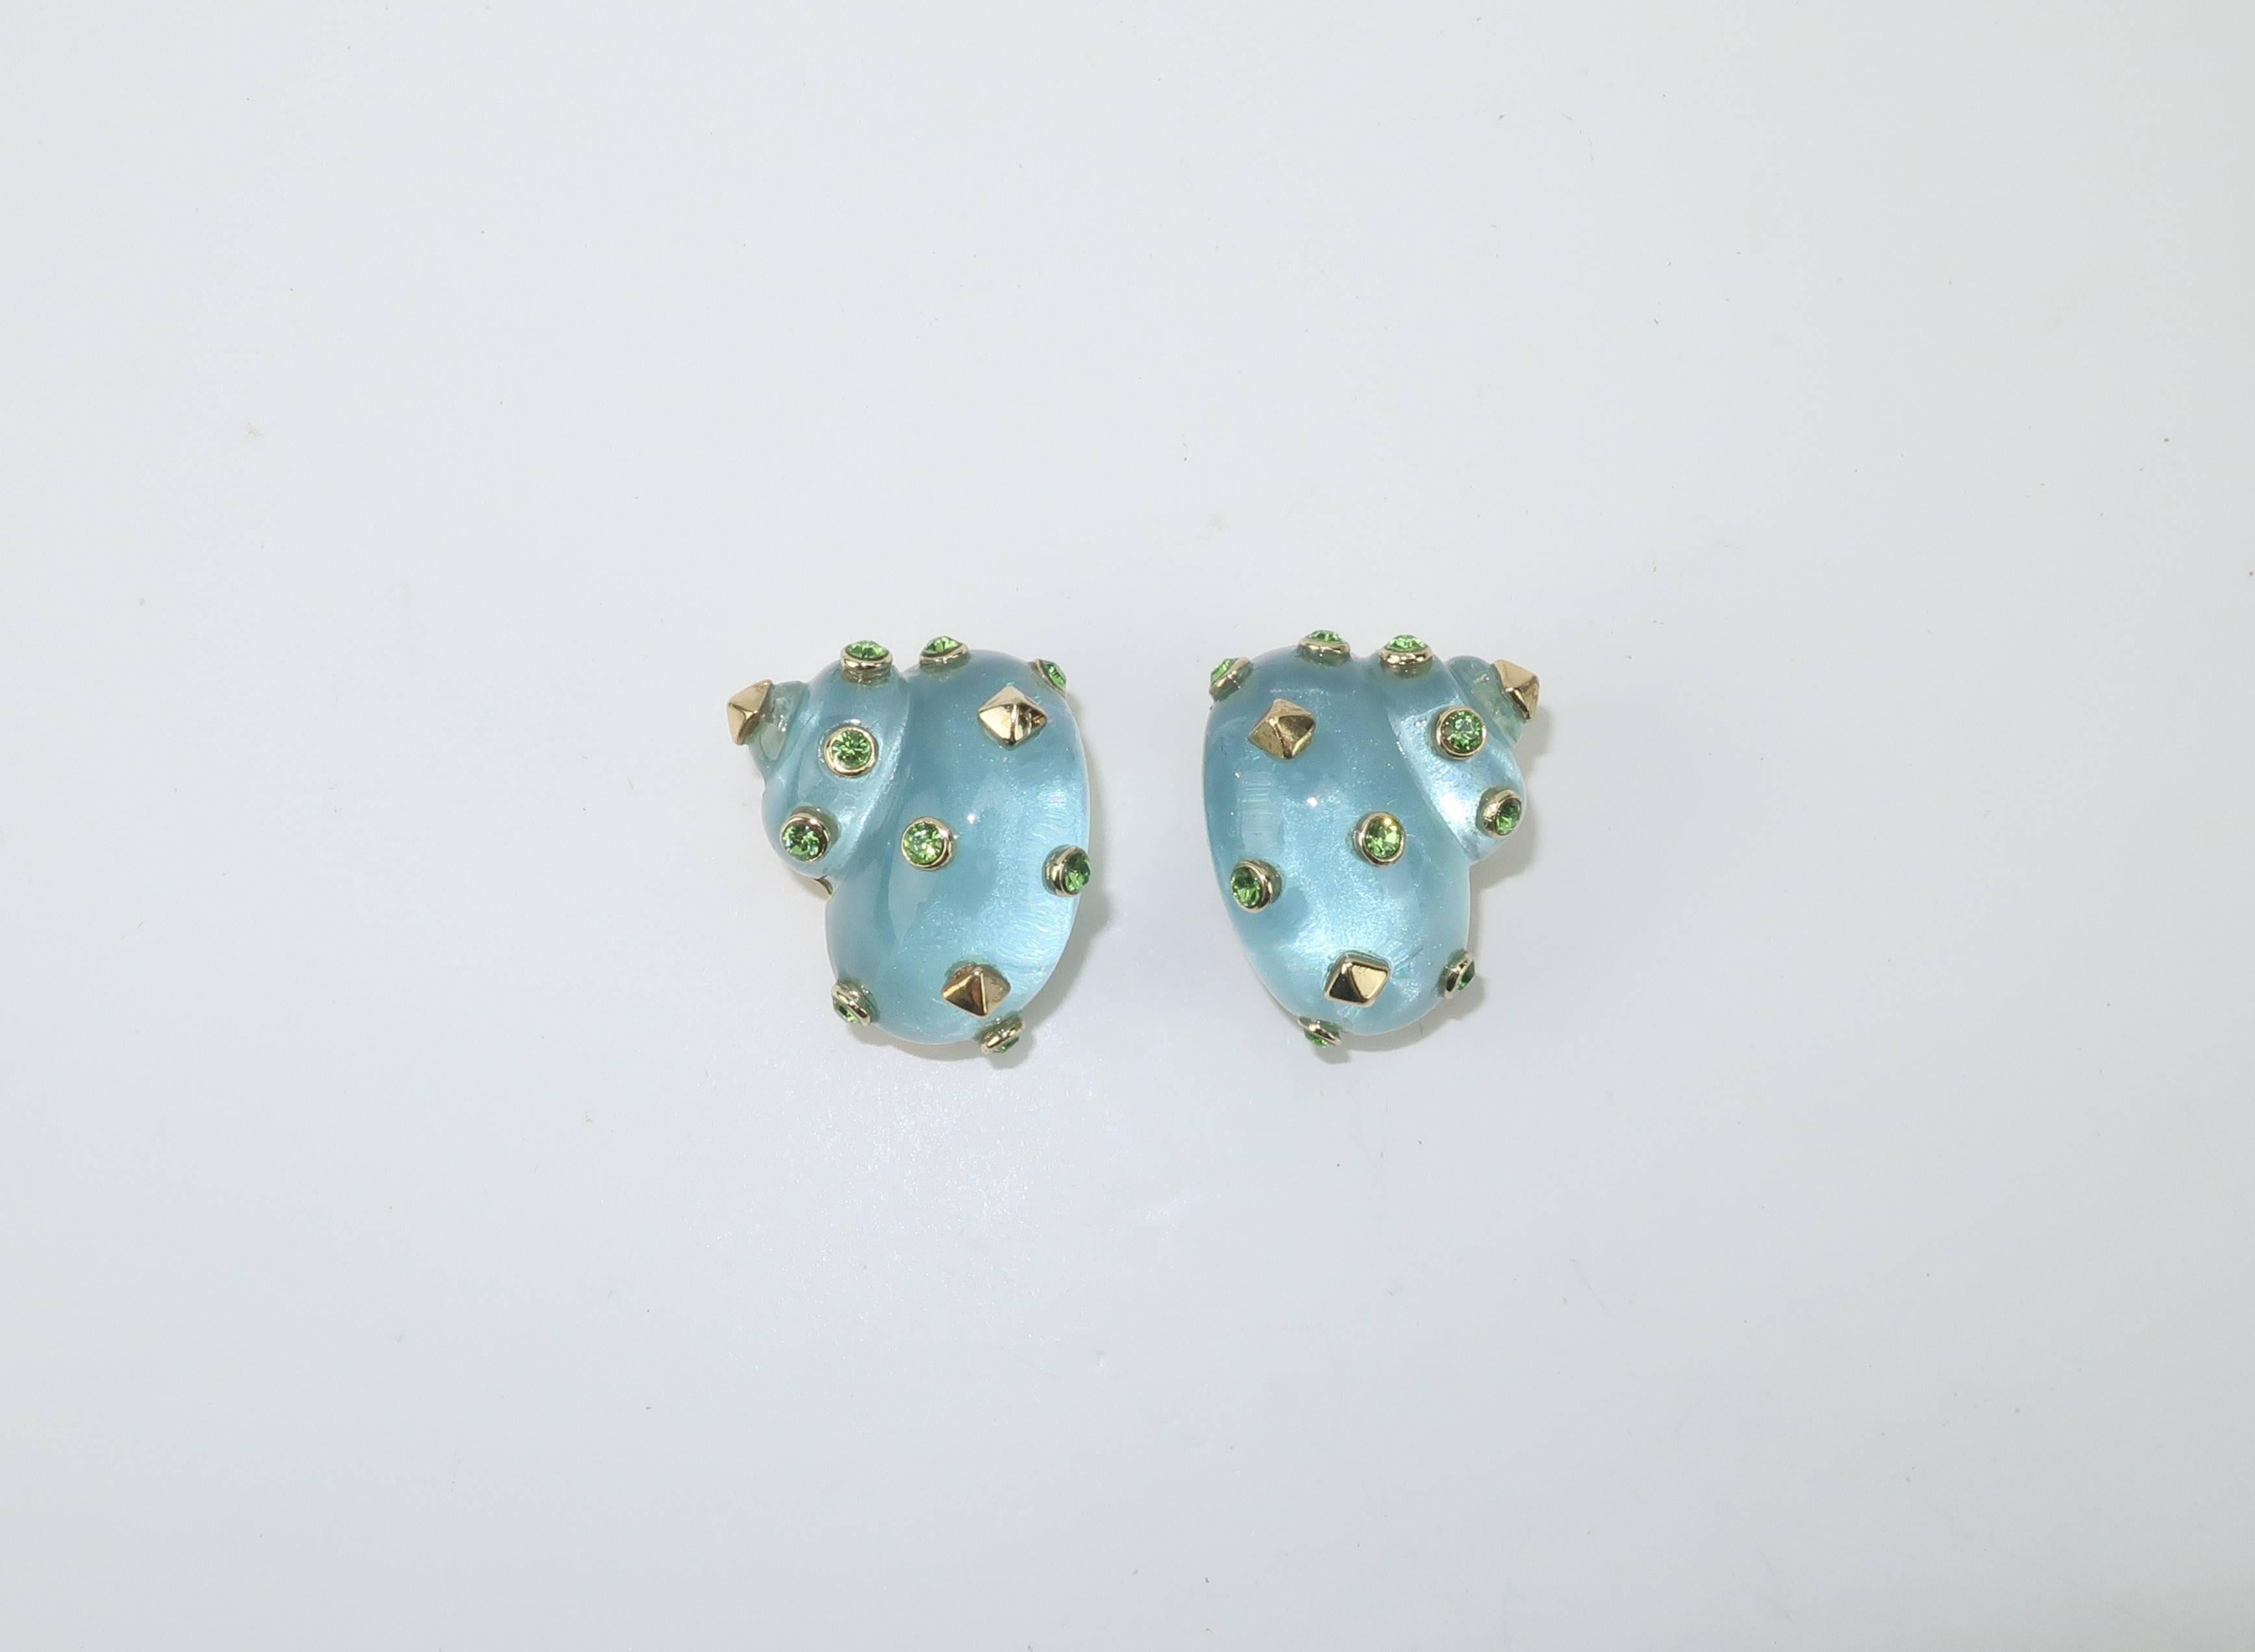 Worthy of a goddess from the seas!  These gorgeous Replica earrings are a sea mist nautilus shape embellished with gold studs and peridot style green crystals.  The translucent resin body of the earrings creates a glow that is sure to draw